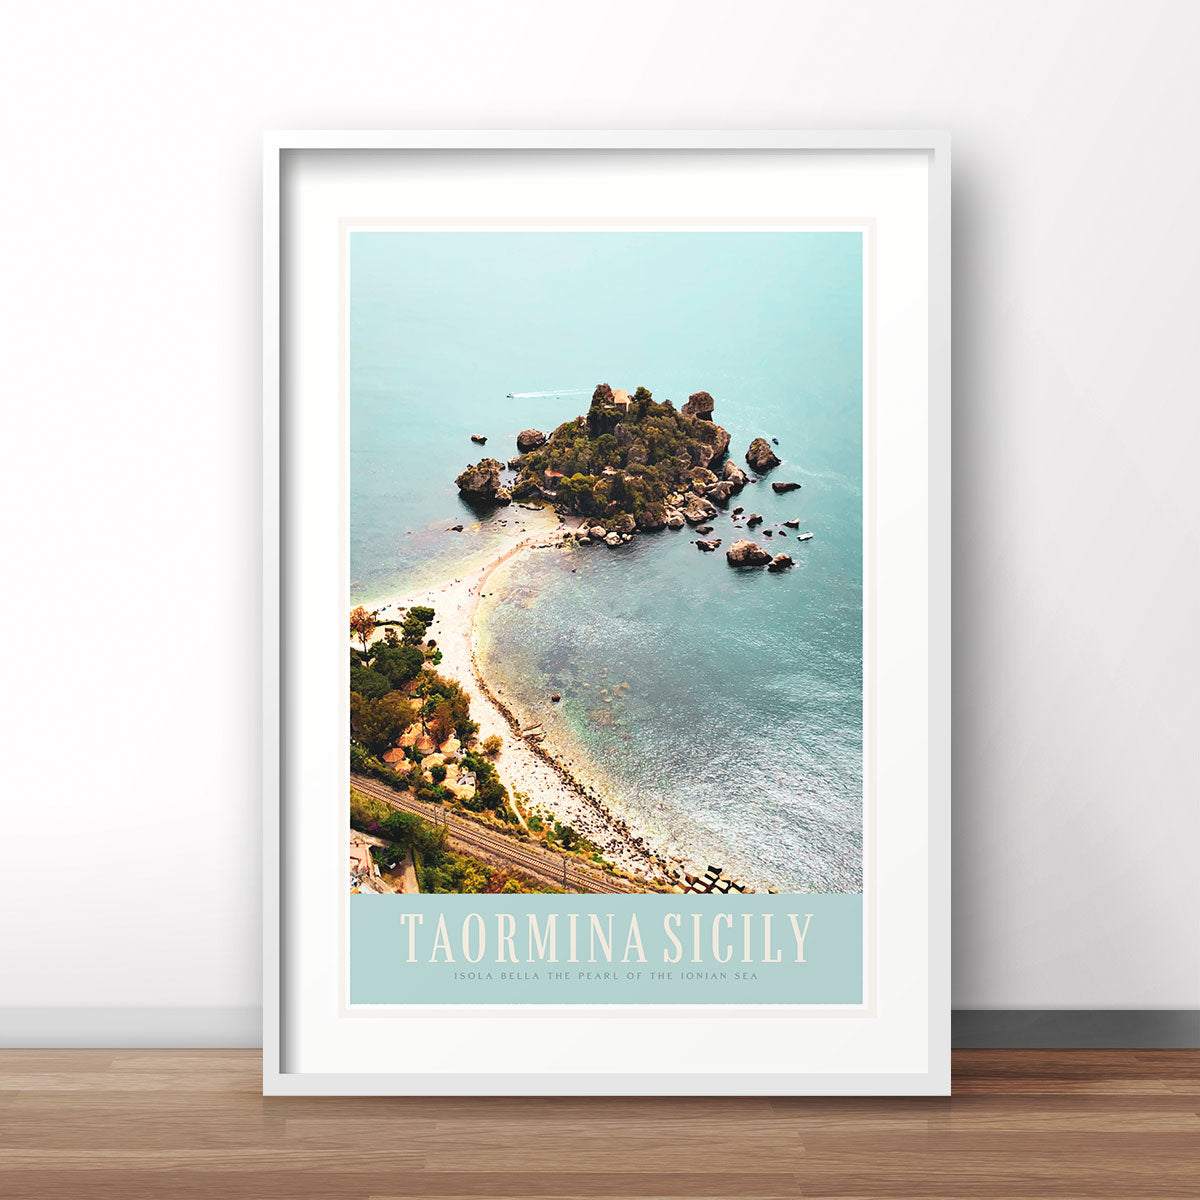 Taormina Sicily vintage retro travel style poster by places we luv